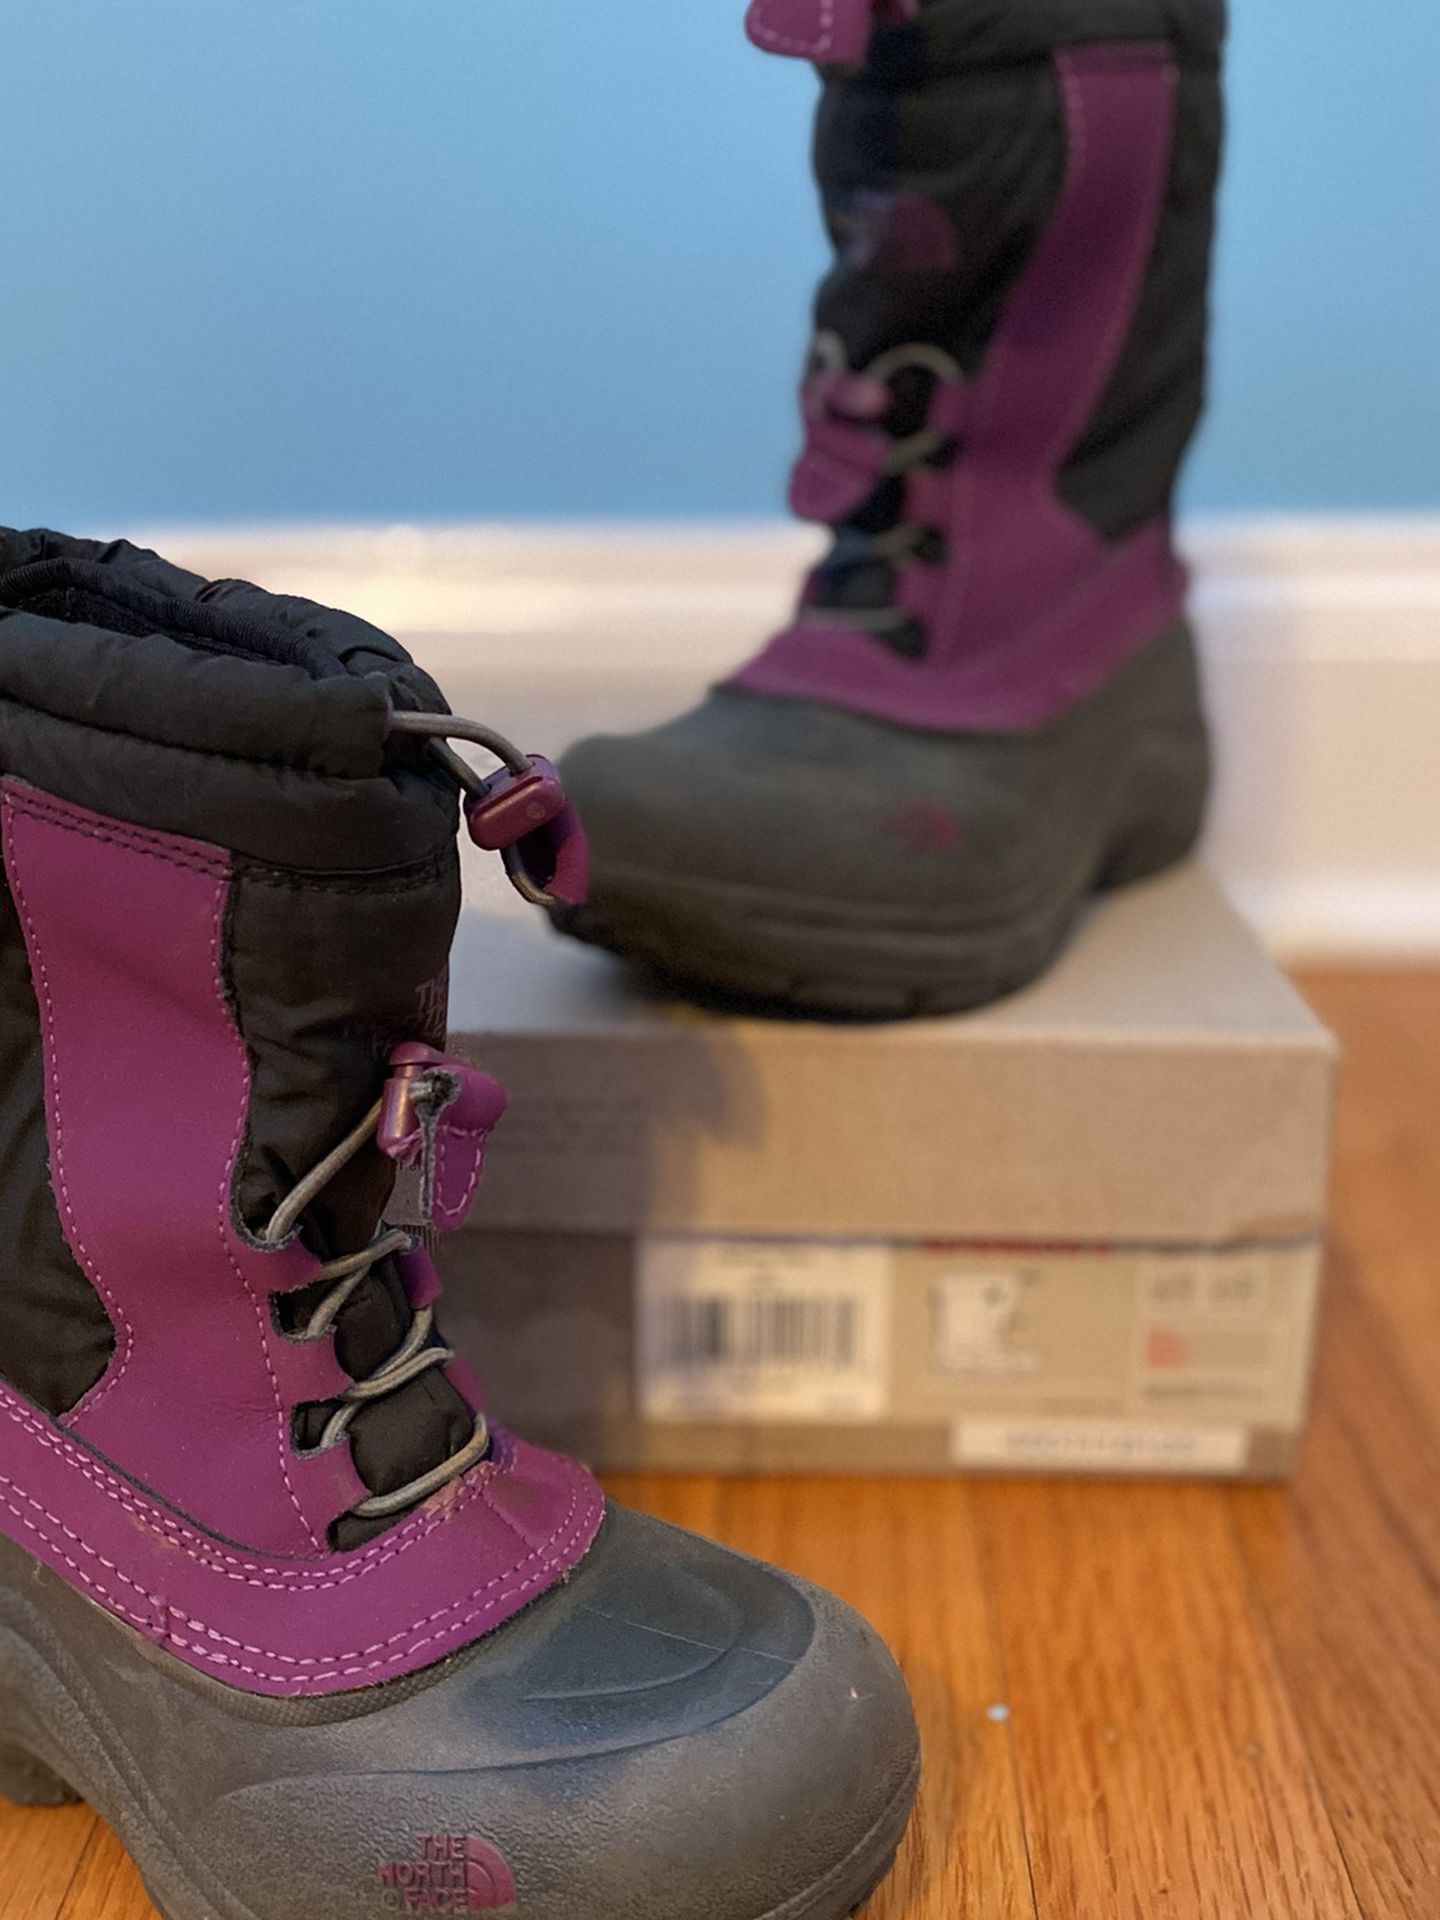 North Face Kid’s Snow Boots Size 12